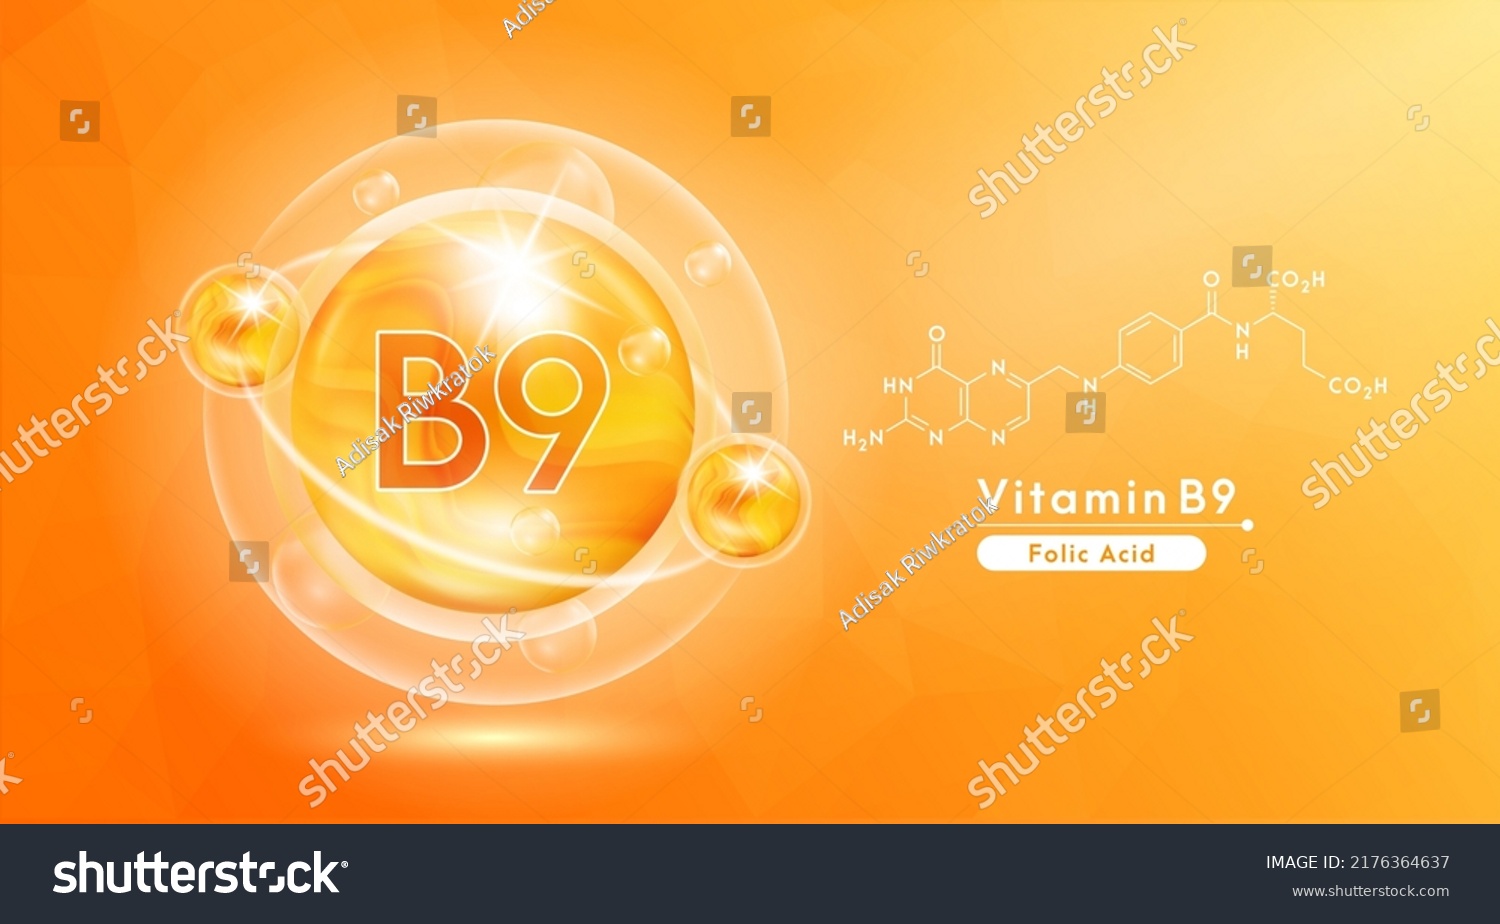 Vitamin B9 orange and structure. Pill vitamins complex and bubble collagen serum chemical formula. Beauty treatment nutrition skin care design. Medical and scientific concepts. 3D Vector EPS10. #2176364637